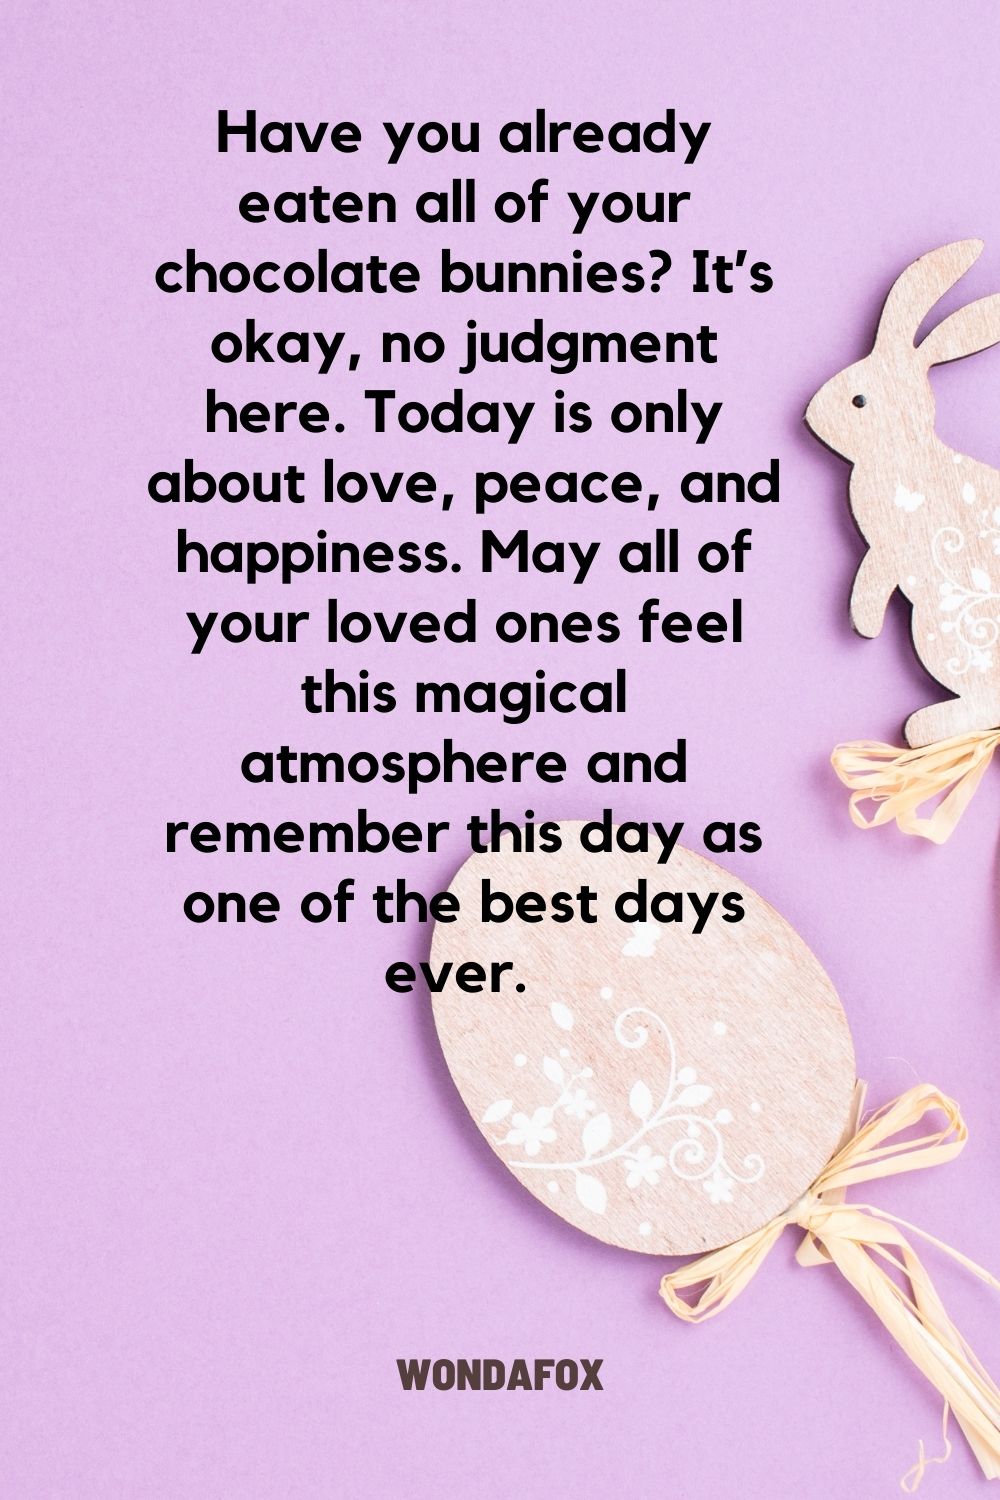 Have you already eaten all of your chocolate bunnies? It’s okay, no judgment here. Today is only about love, peace, and happiness. May all of your loved ones feel this magical atmosphere and remember this day as one of the best days ever. 